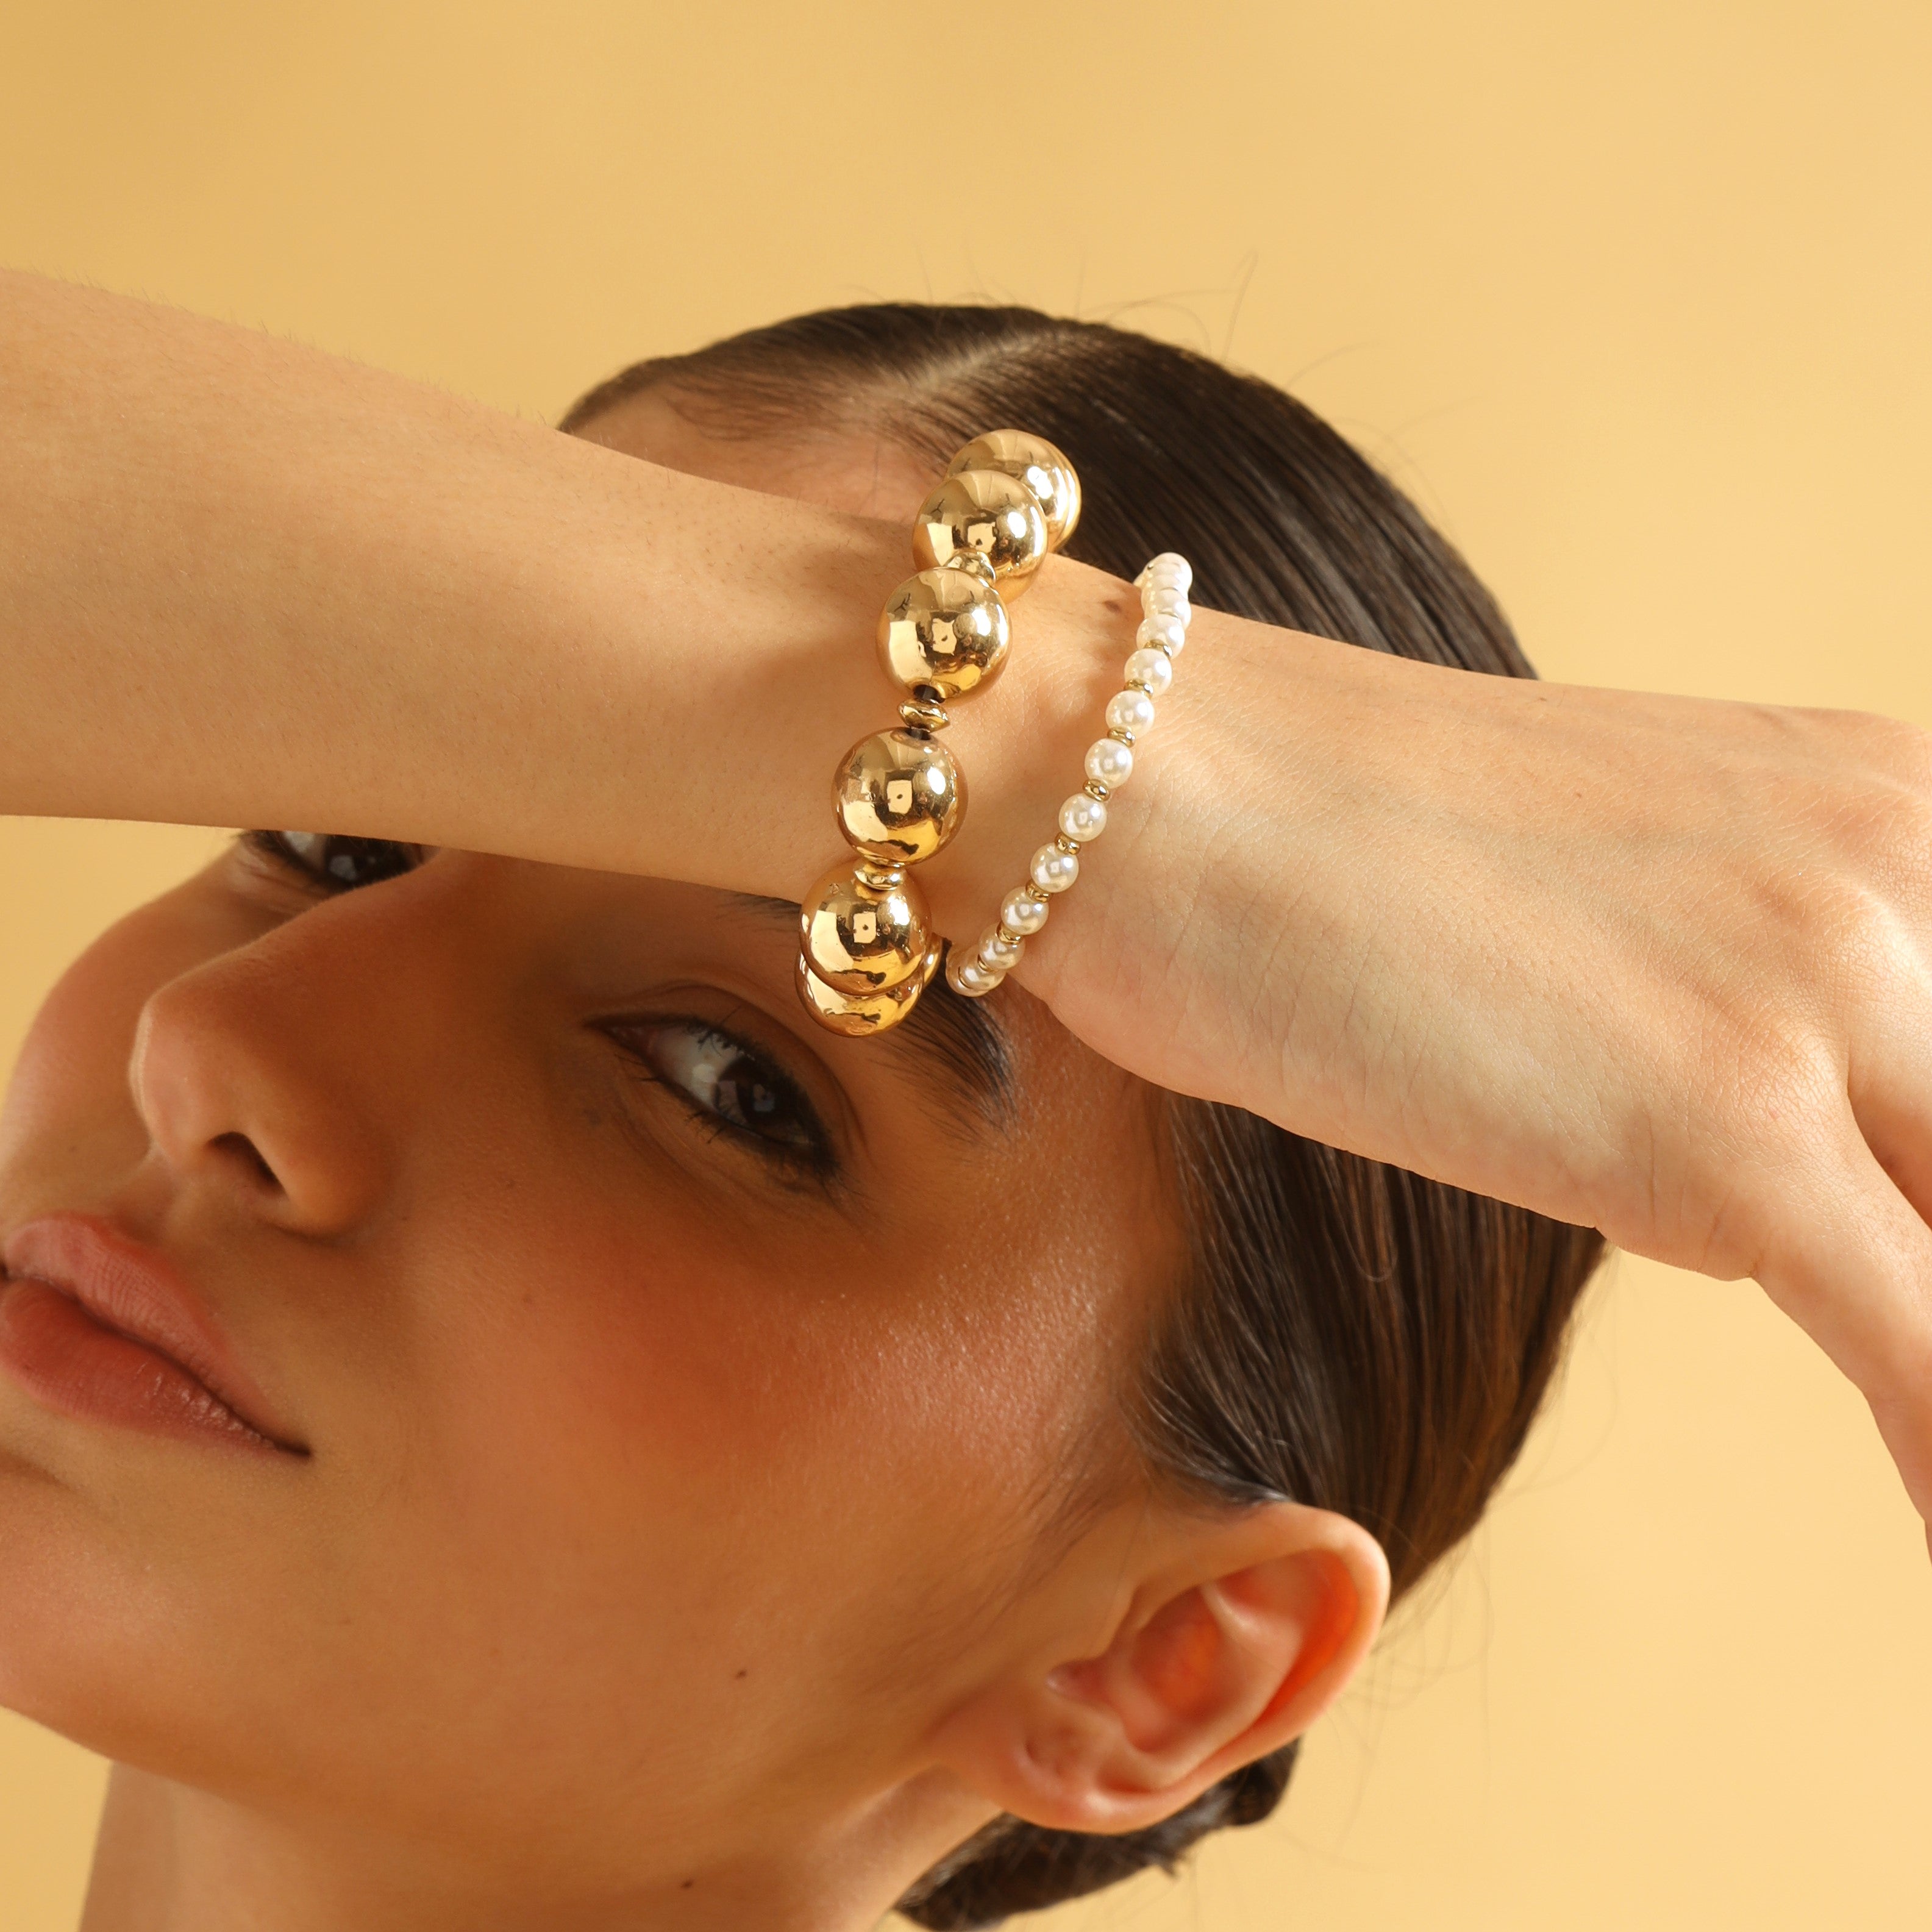 TFC Pretty Pearl and Gold Stack Bracelet-Discover our stunning collection of stylish bracelets for women, featuring exquisite pearl bracelets, handcrafted beaded bracelets, and elegant gold-plated designs. Enjoy cheapest anti-tarnish fashion jewellery and long-lasting brilliance only at The Fun Company